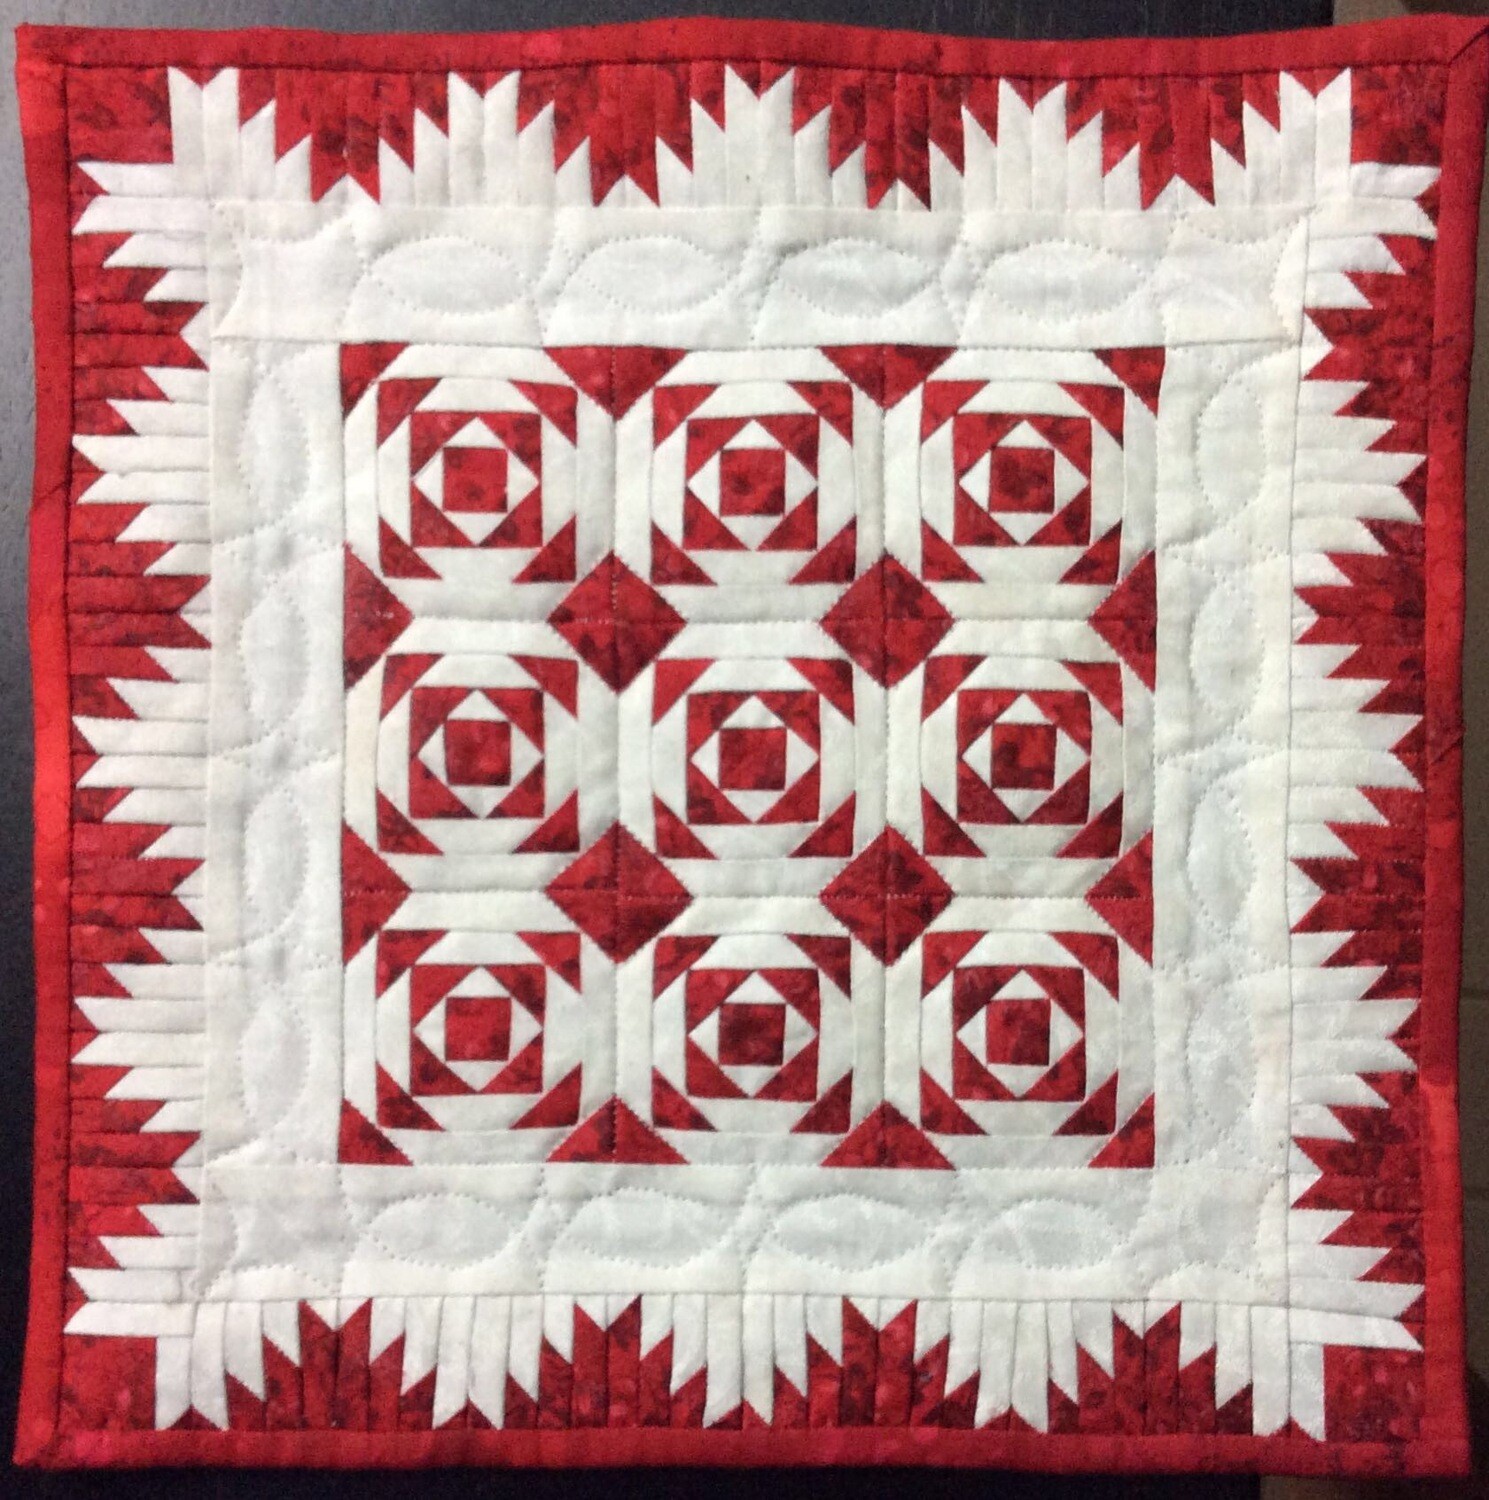 Downloadable .PDF pattern for Delectable Pineapples Red and White Miniature Quilt with border options